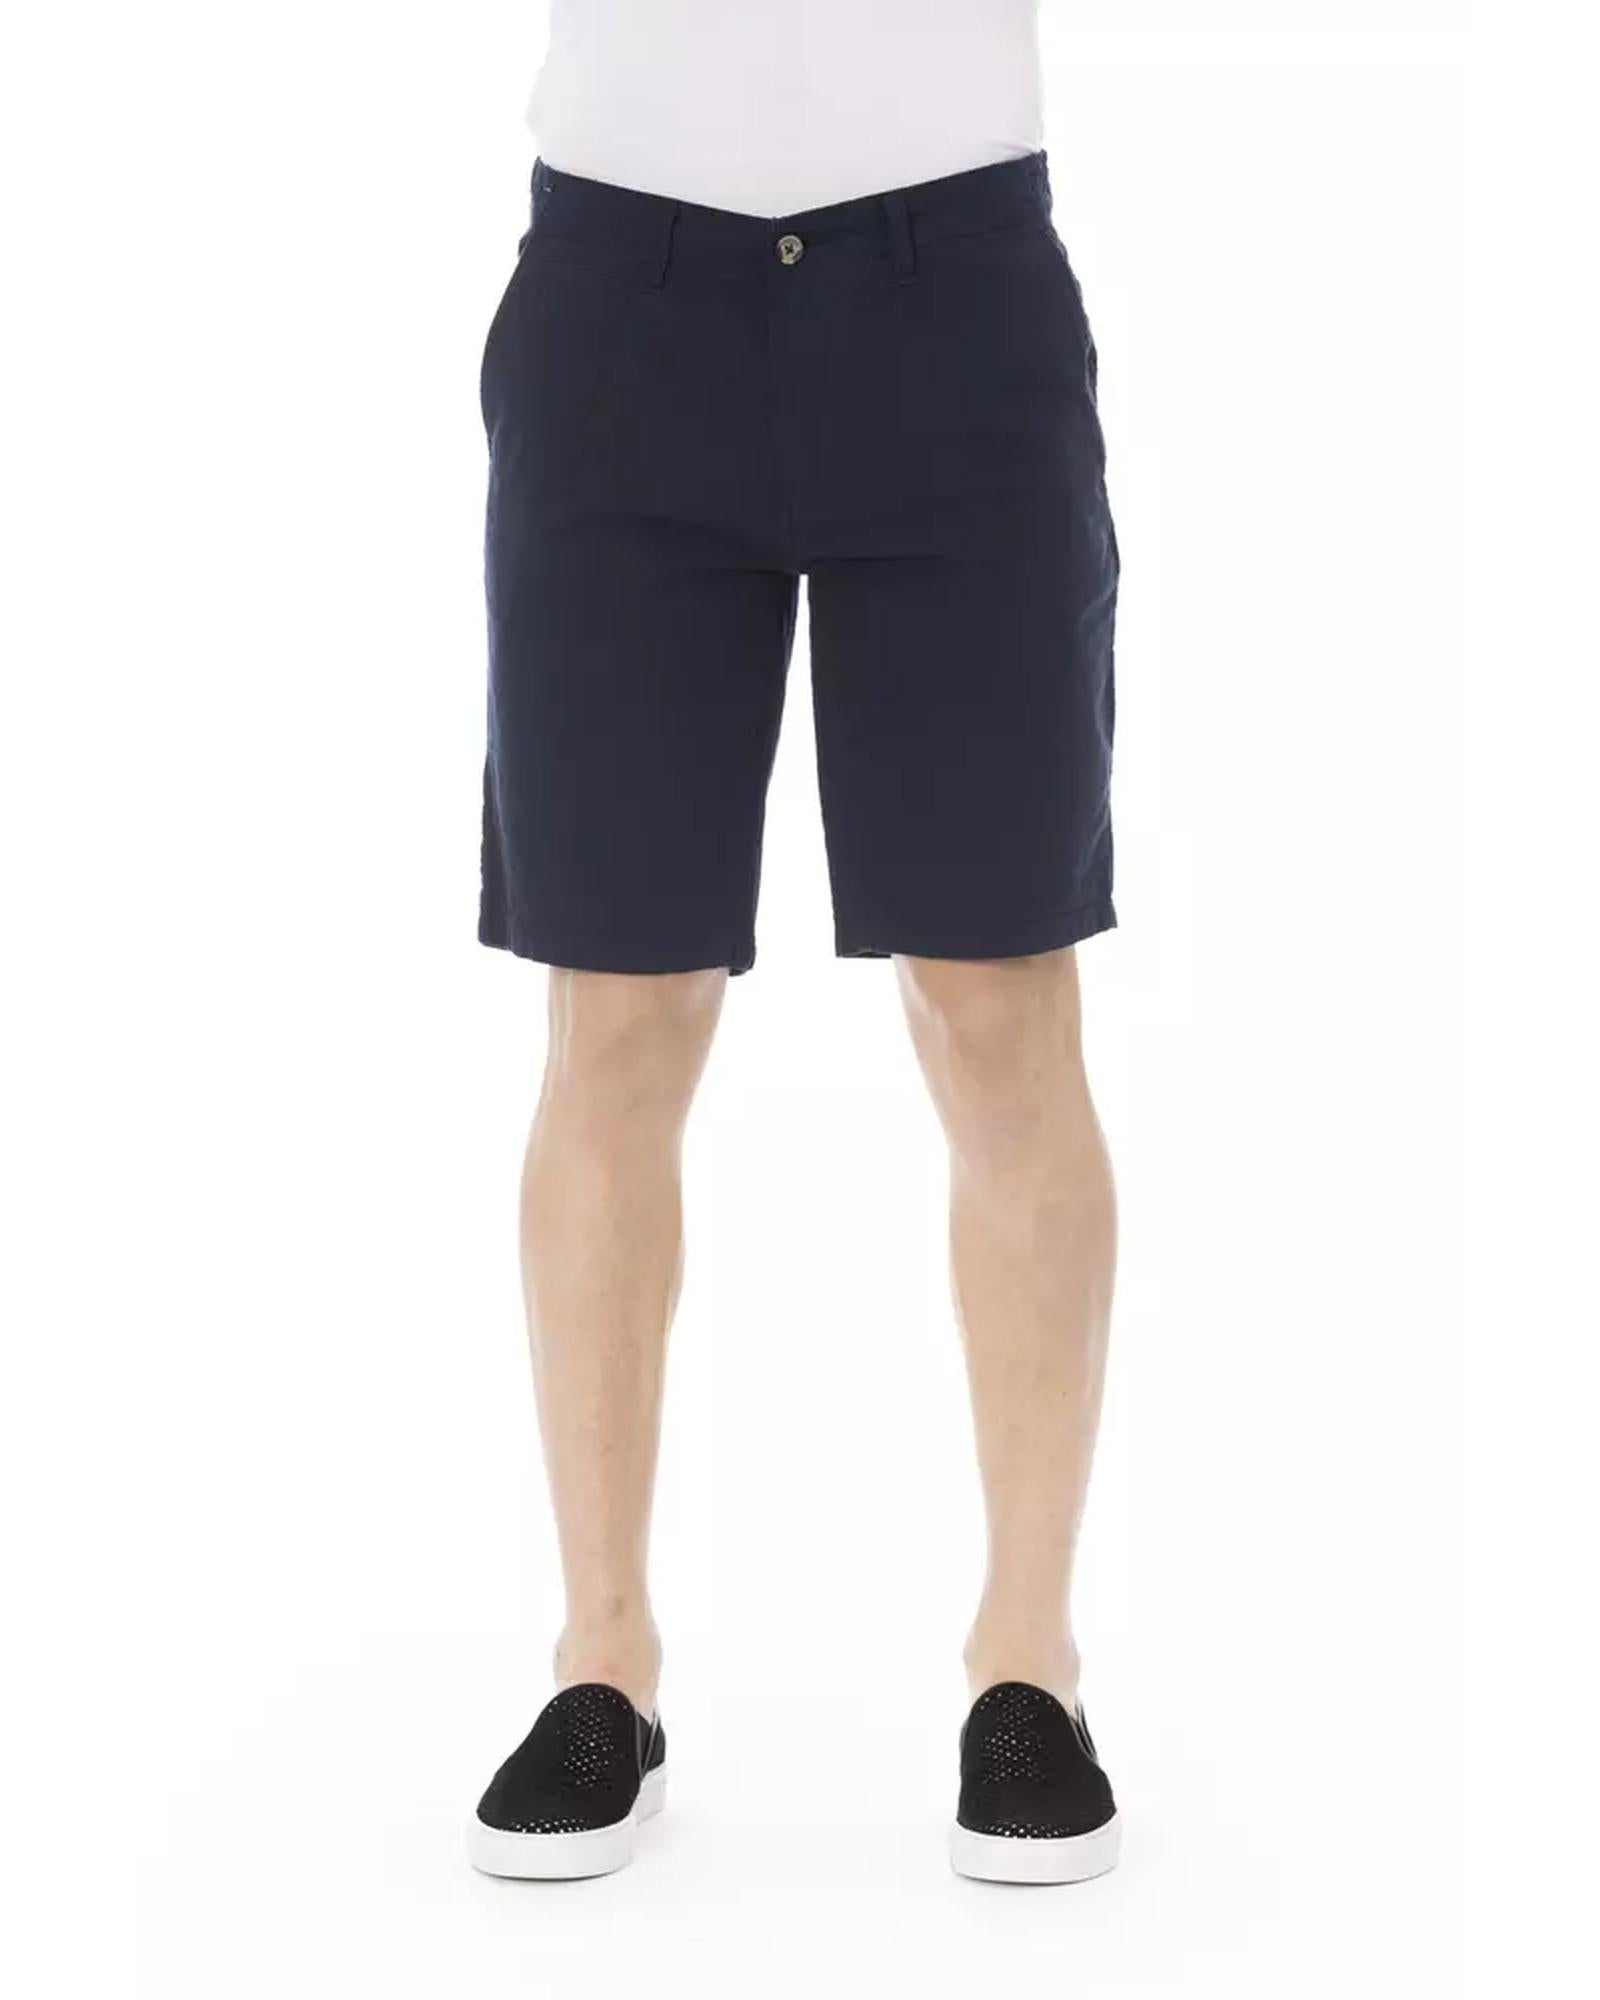 Solid Color Bermuda Shorts with Zipper and Button Closure W48 US Men